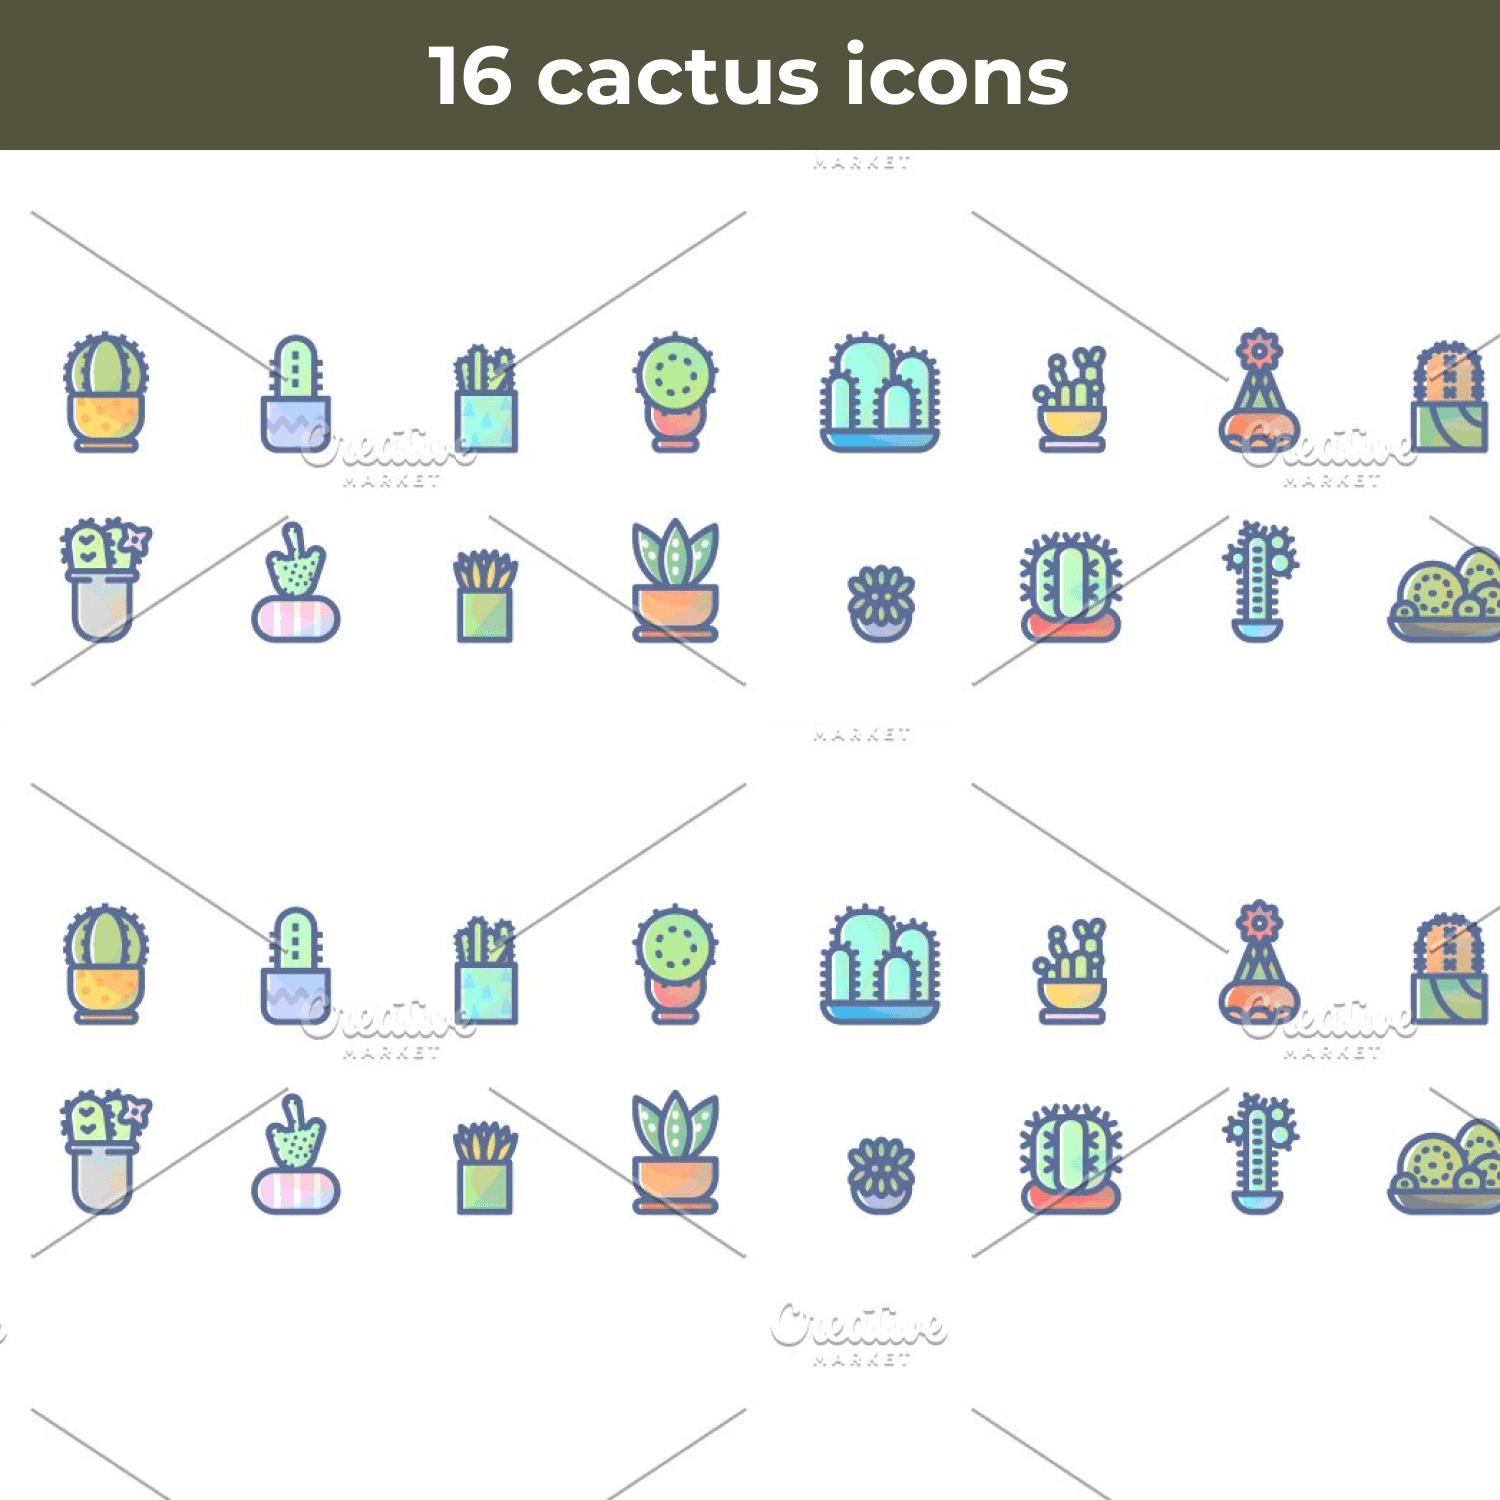 16 cactus icons cover image.